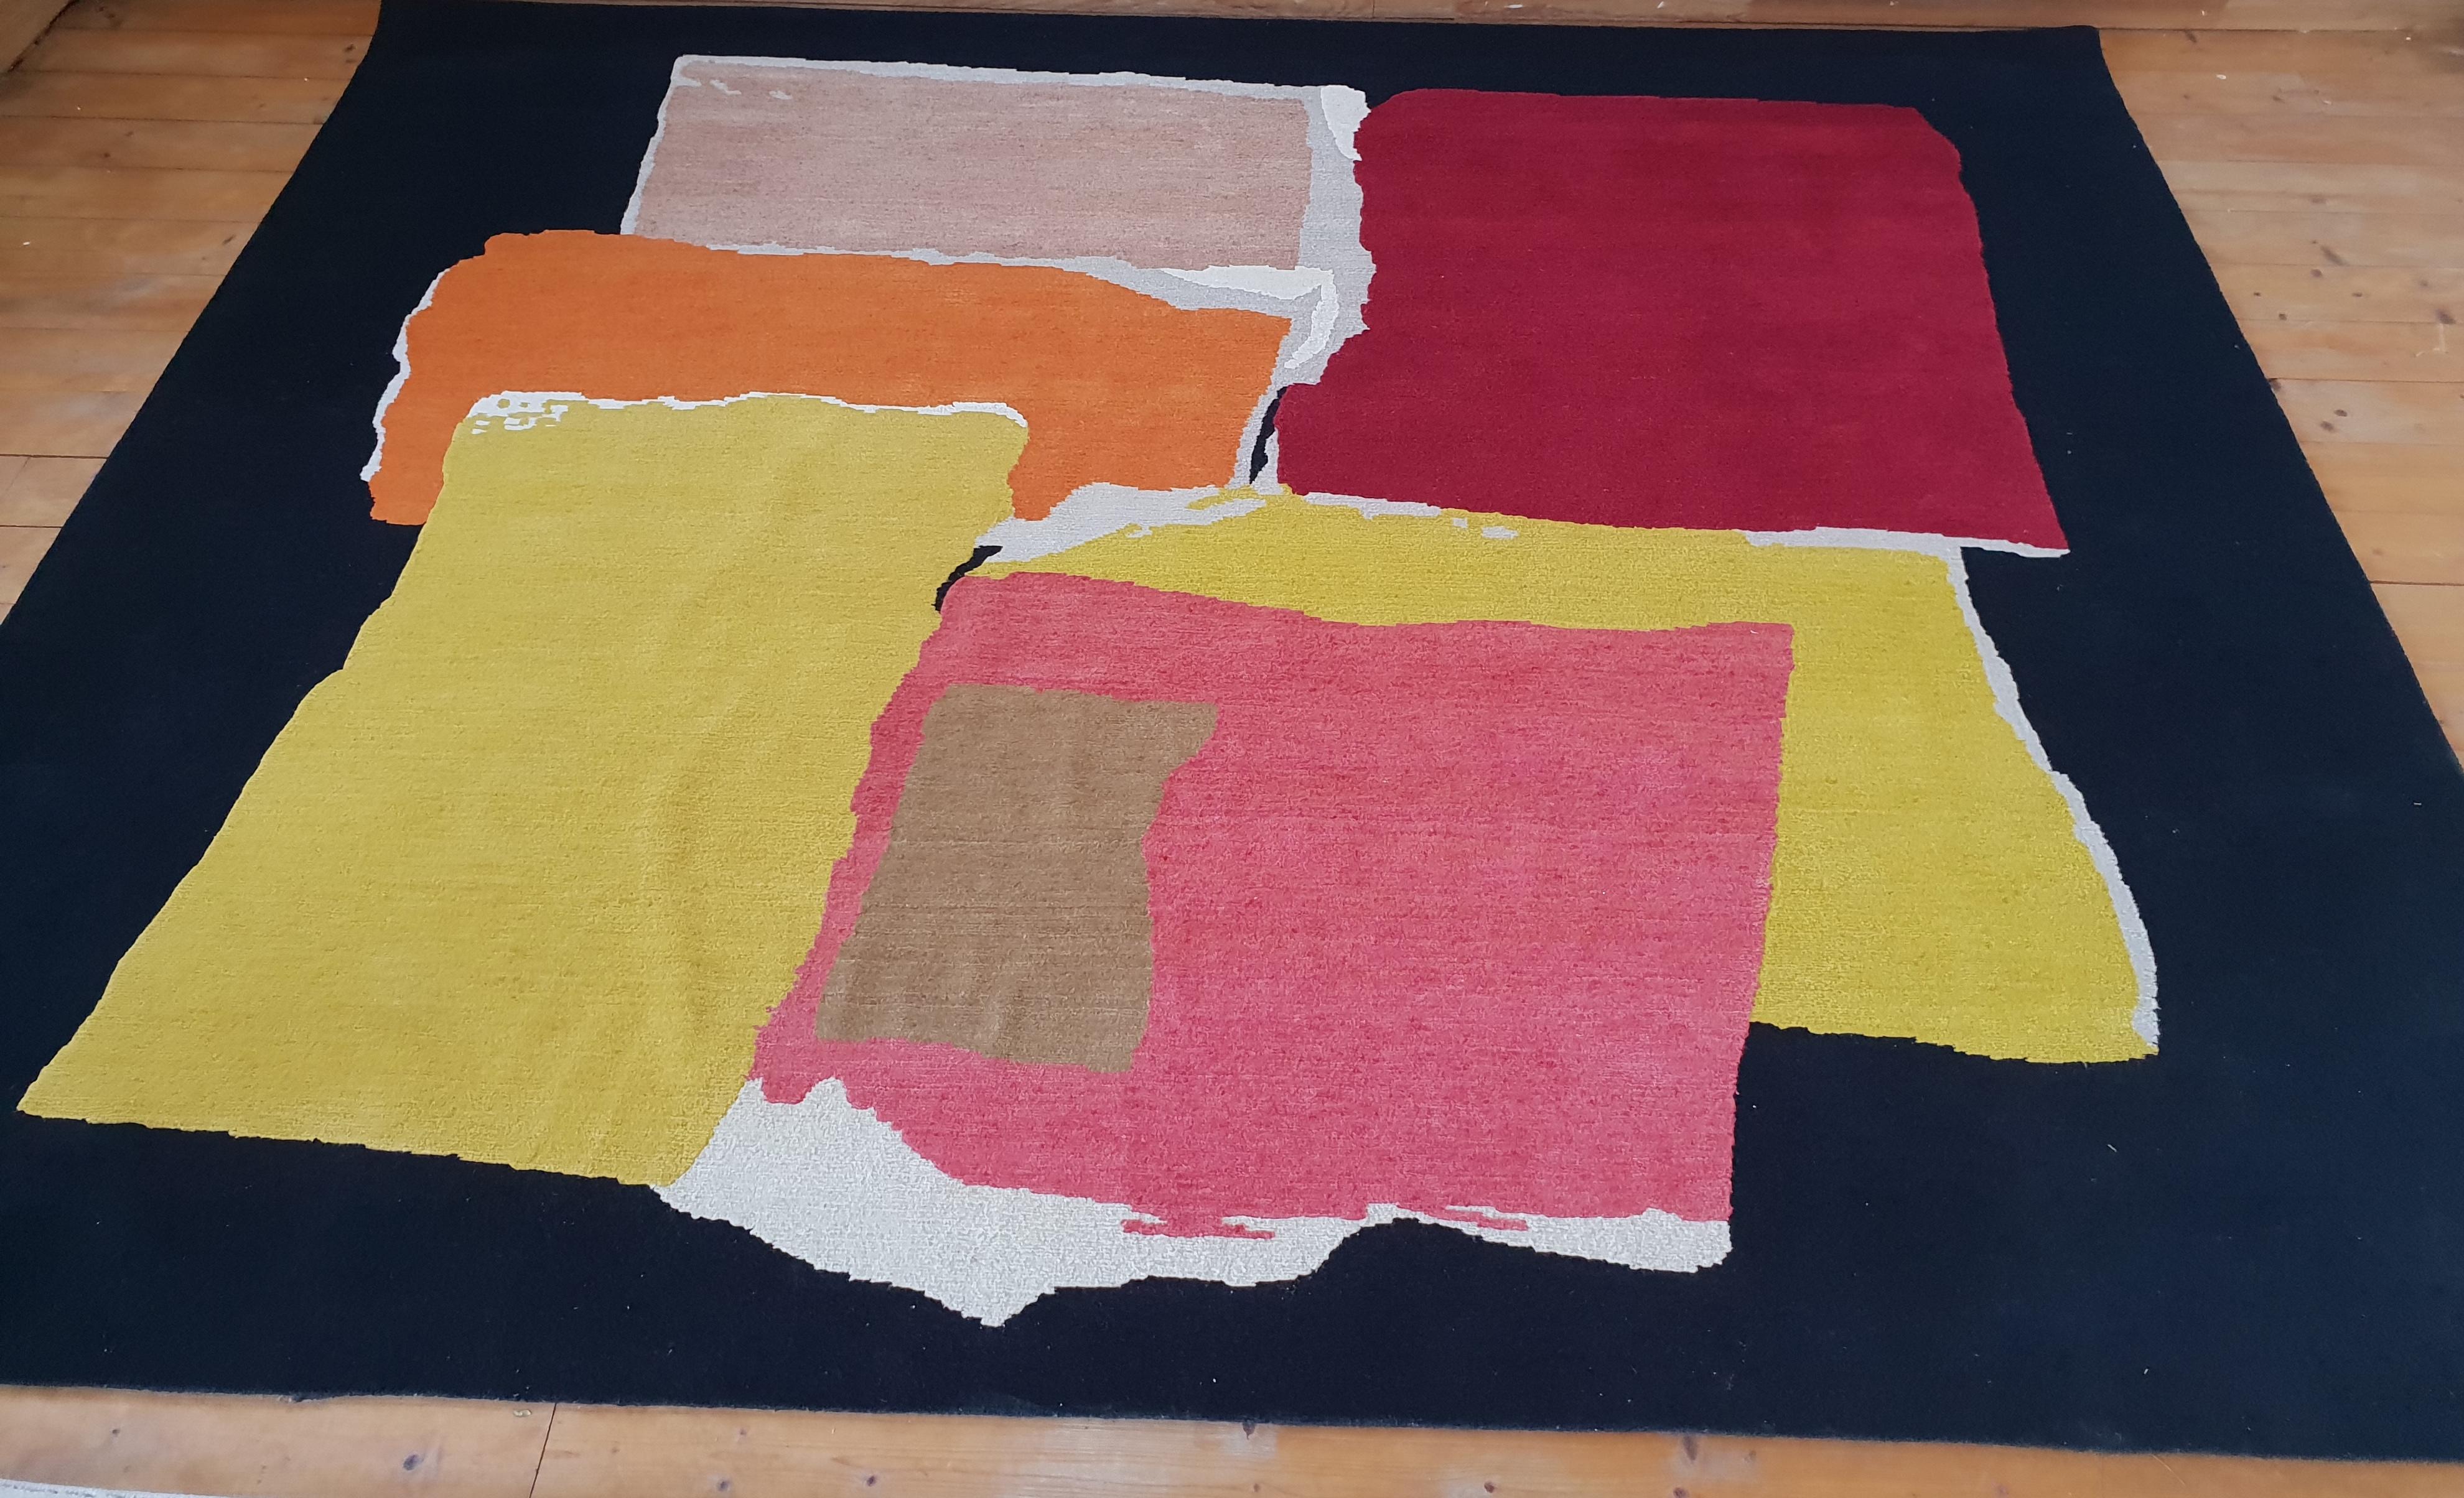 Rhizomes 4 colorful hand knotted rug by Charlotte Culot
Edition: 8
Signed
Dimensions: 190 x 155 cm
Materials: Silk, wool, linen, allo
Hand knotted.

During a visit to Château La Coste in 2018 Charlotte Culot was inspired by a strikingly